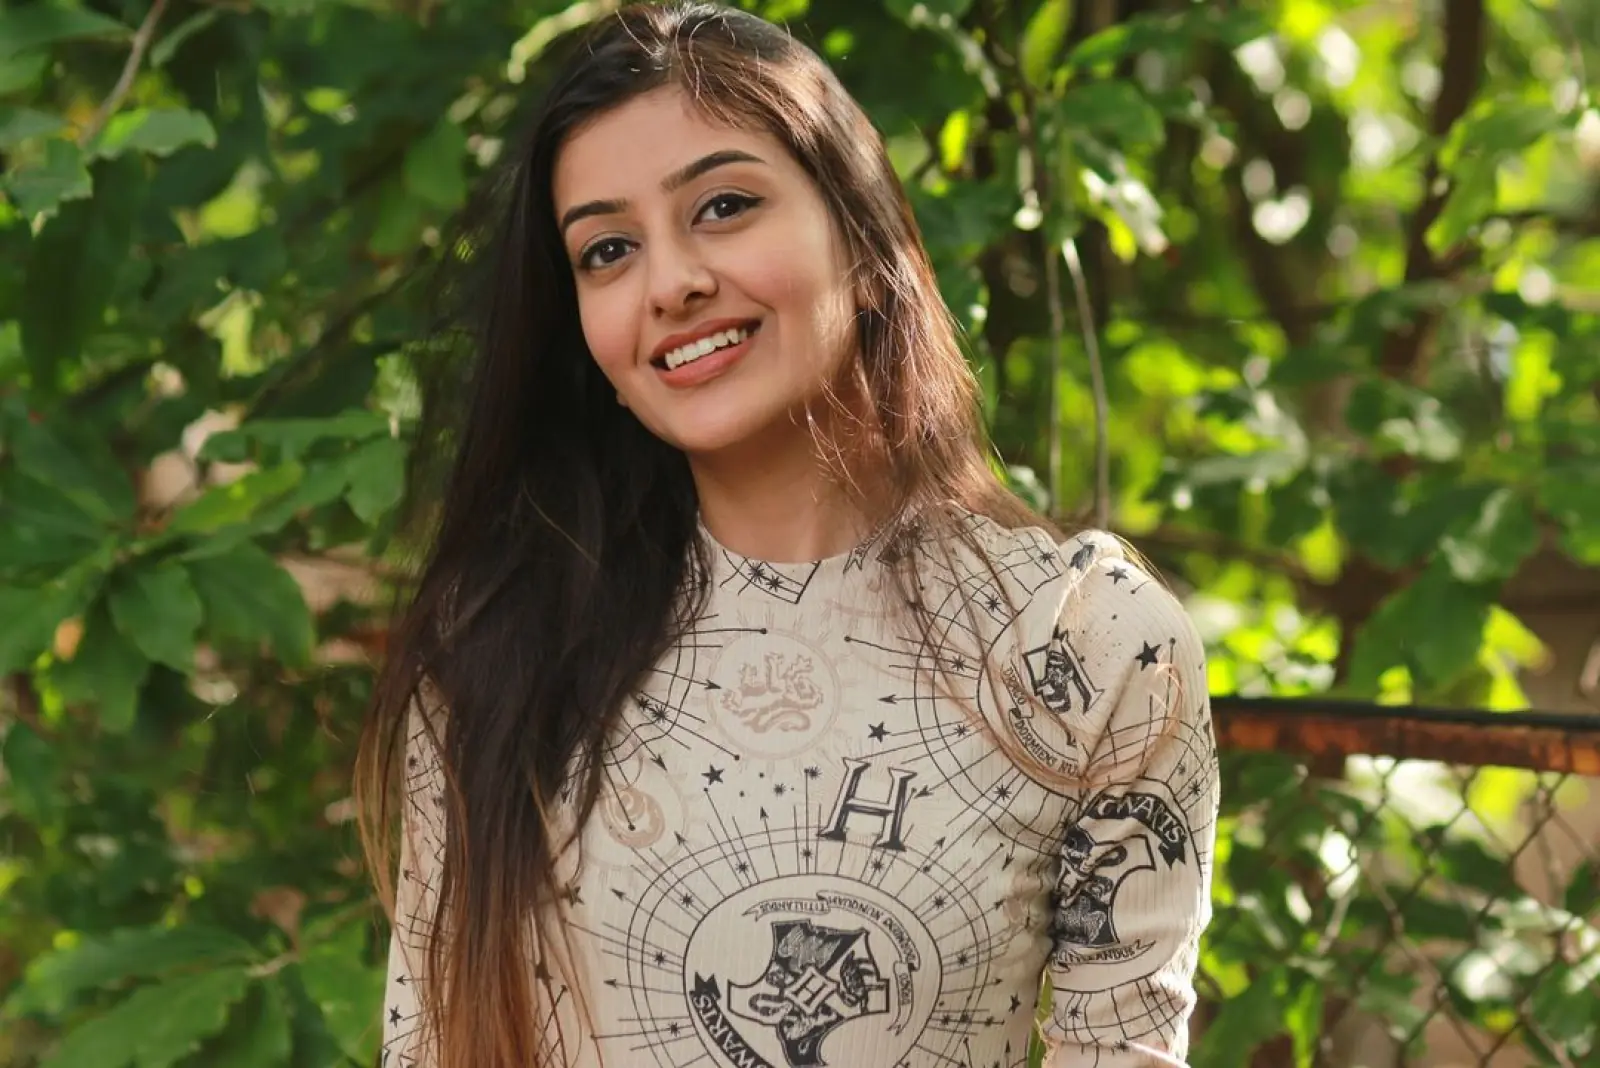 Zee Punjabi Welcomes Newcomer Surbhi Mittal in Lead Role as 'Shivika' in Upcoming Show Premiering February 5th